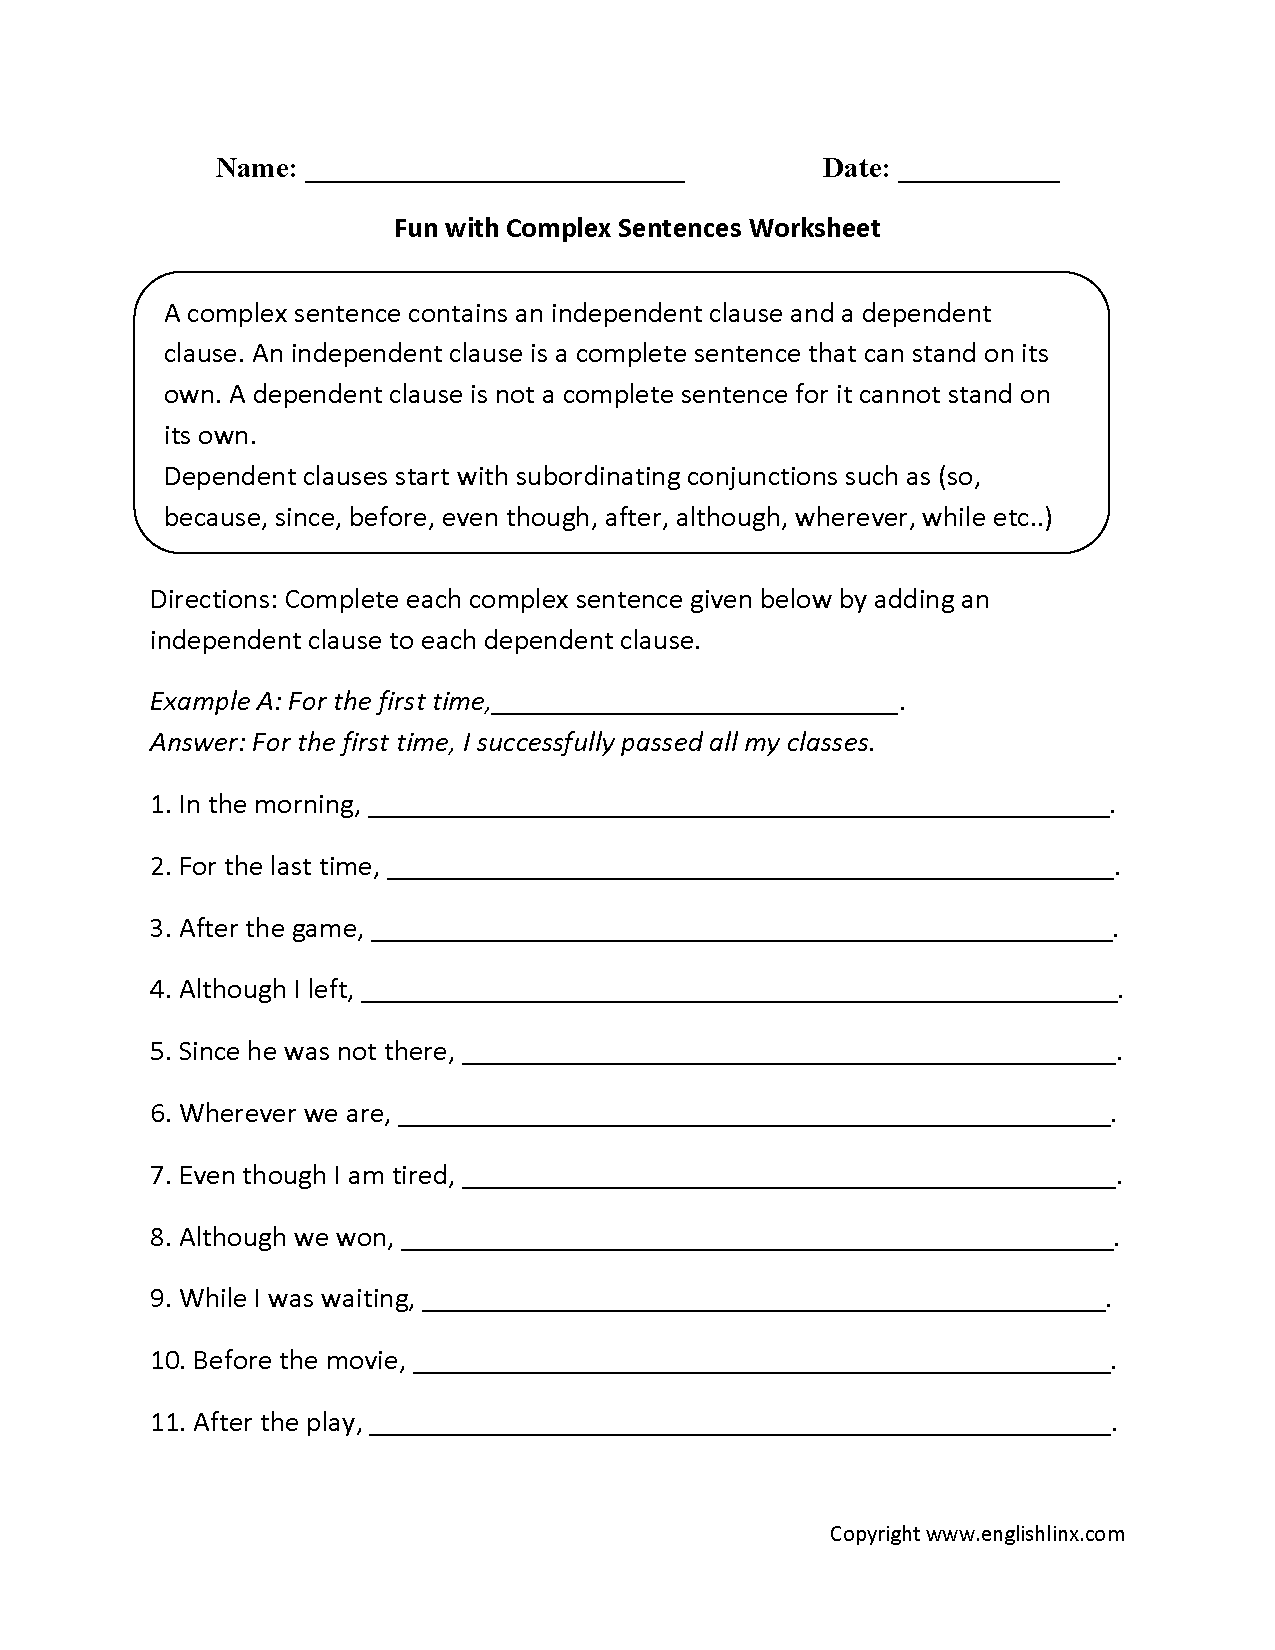 Fun with Complex Sentences Worksheet